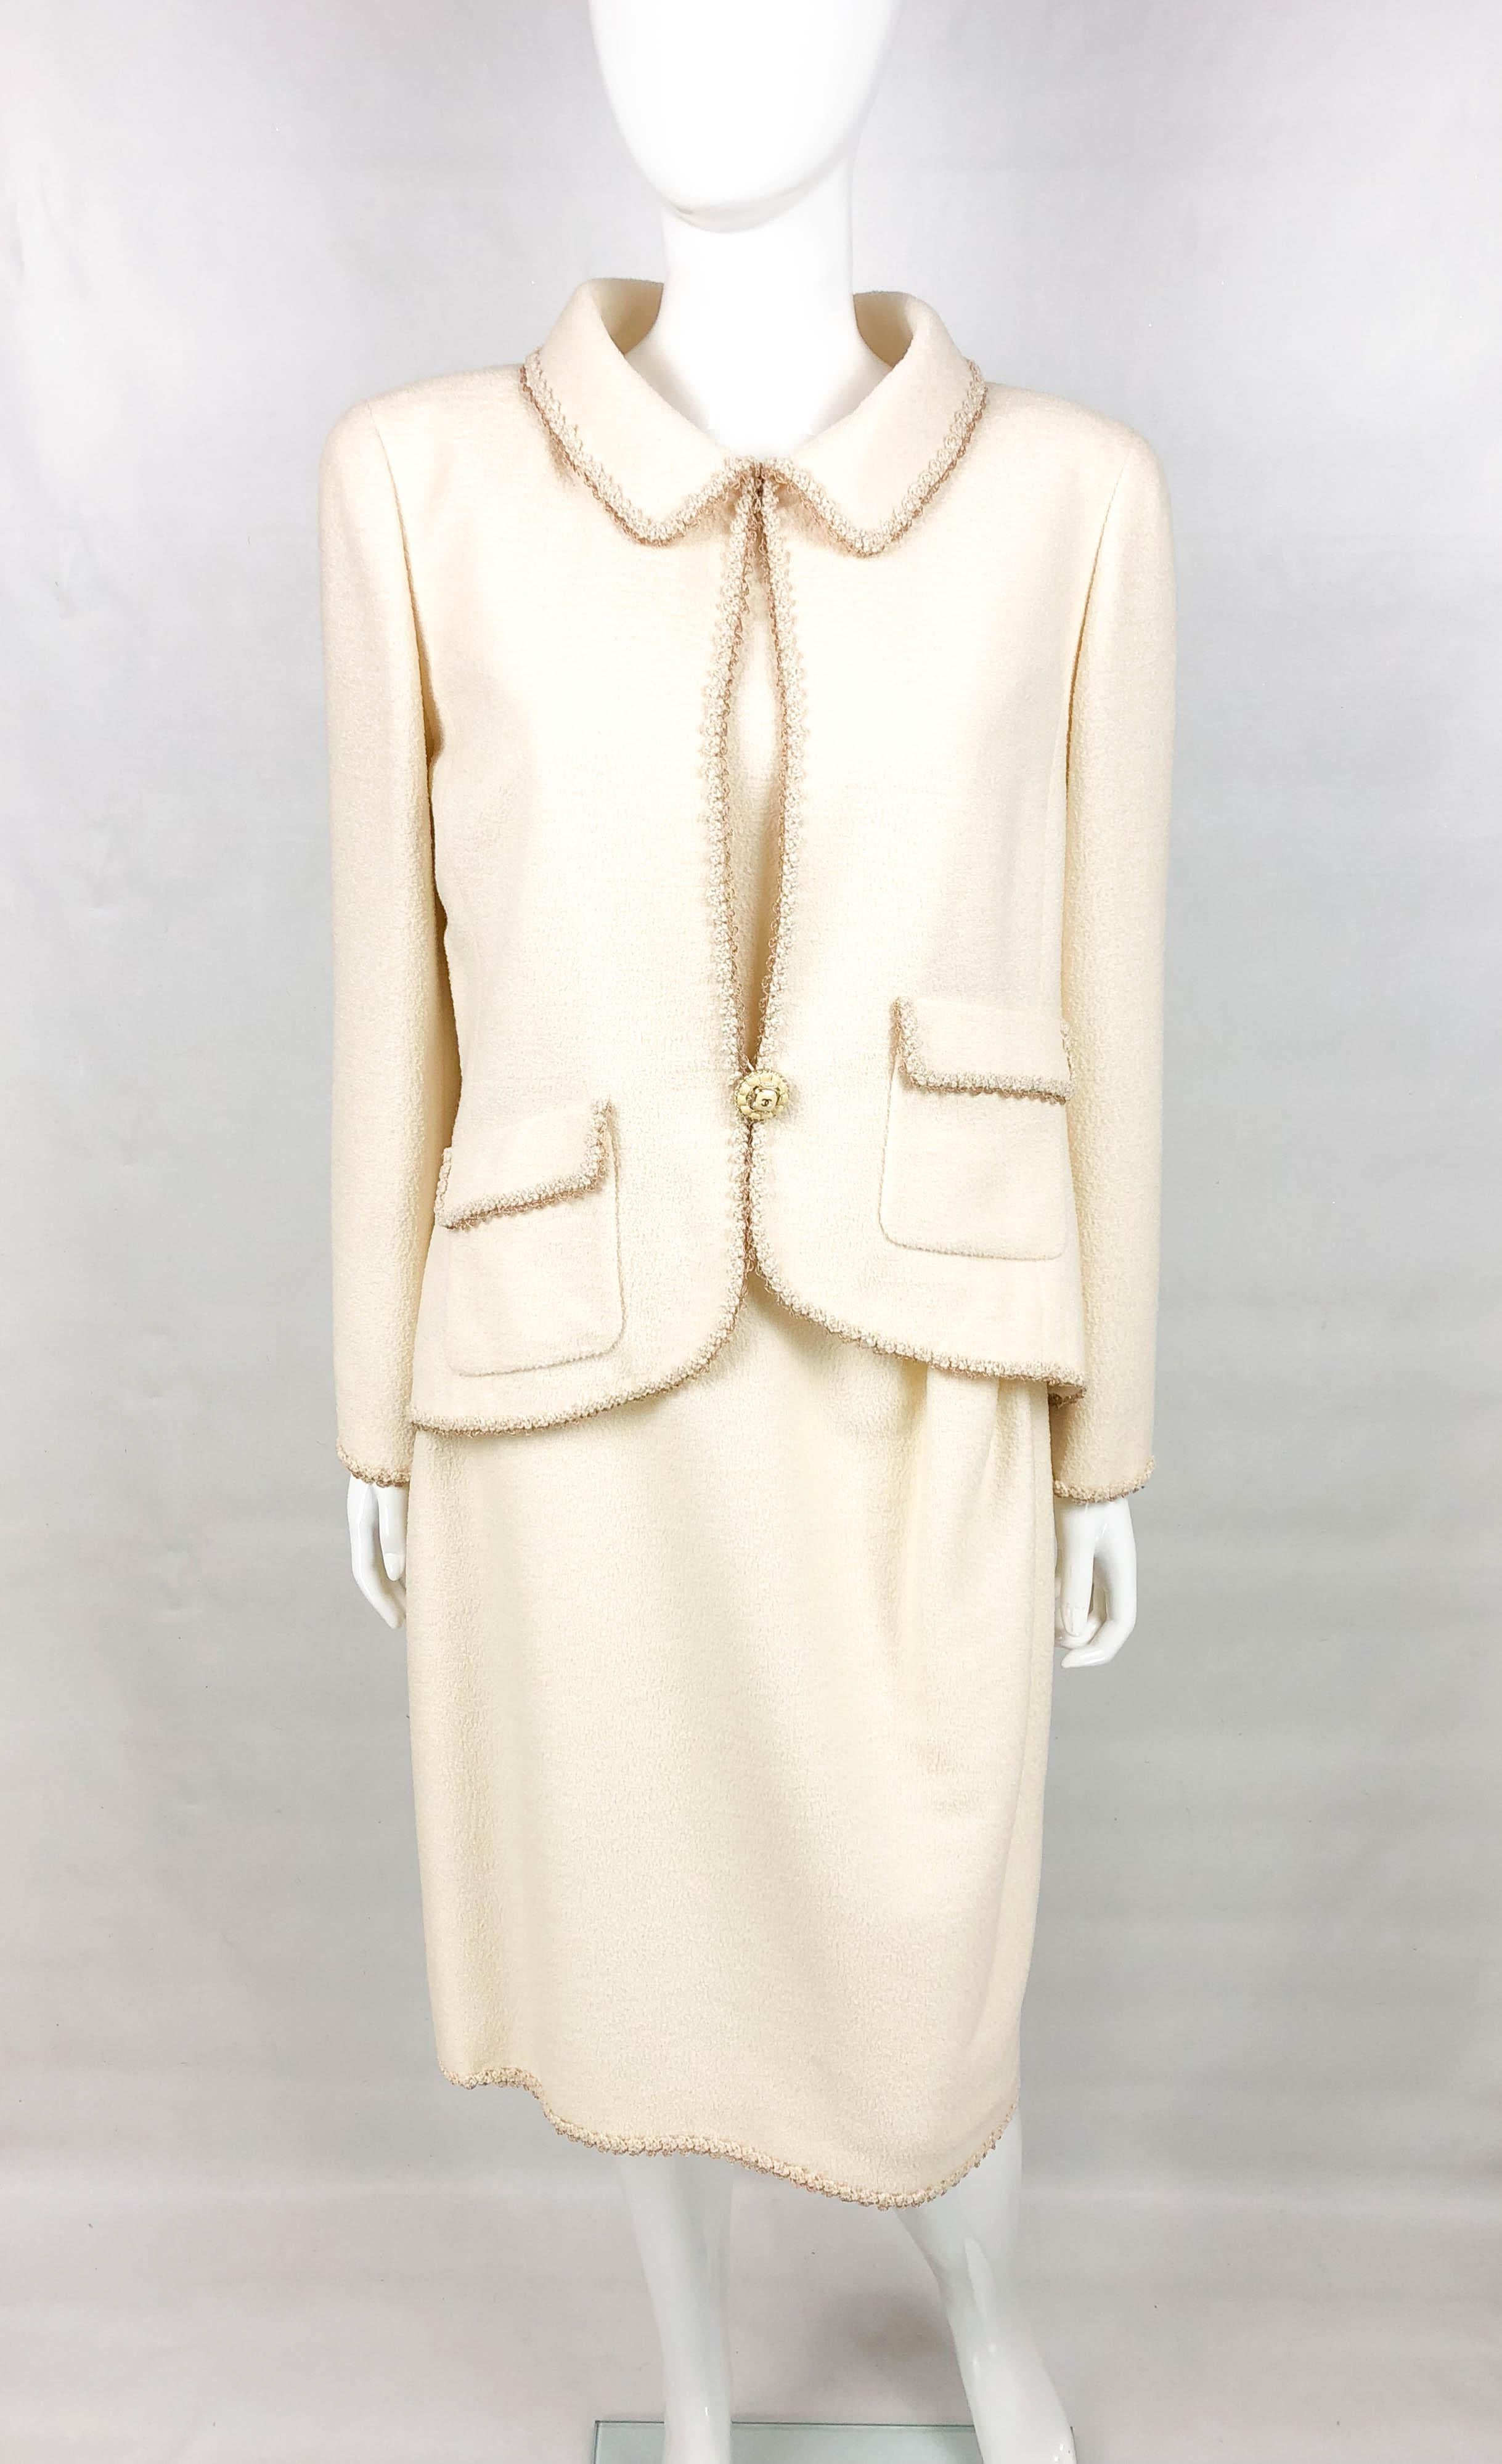 2010 Unworn Chanel Runway Cream Jacket and Dress Ensemble With Gold Thread Trim In New Condition In London, Chelsea